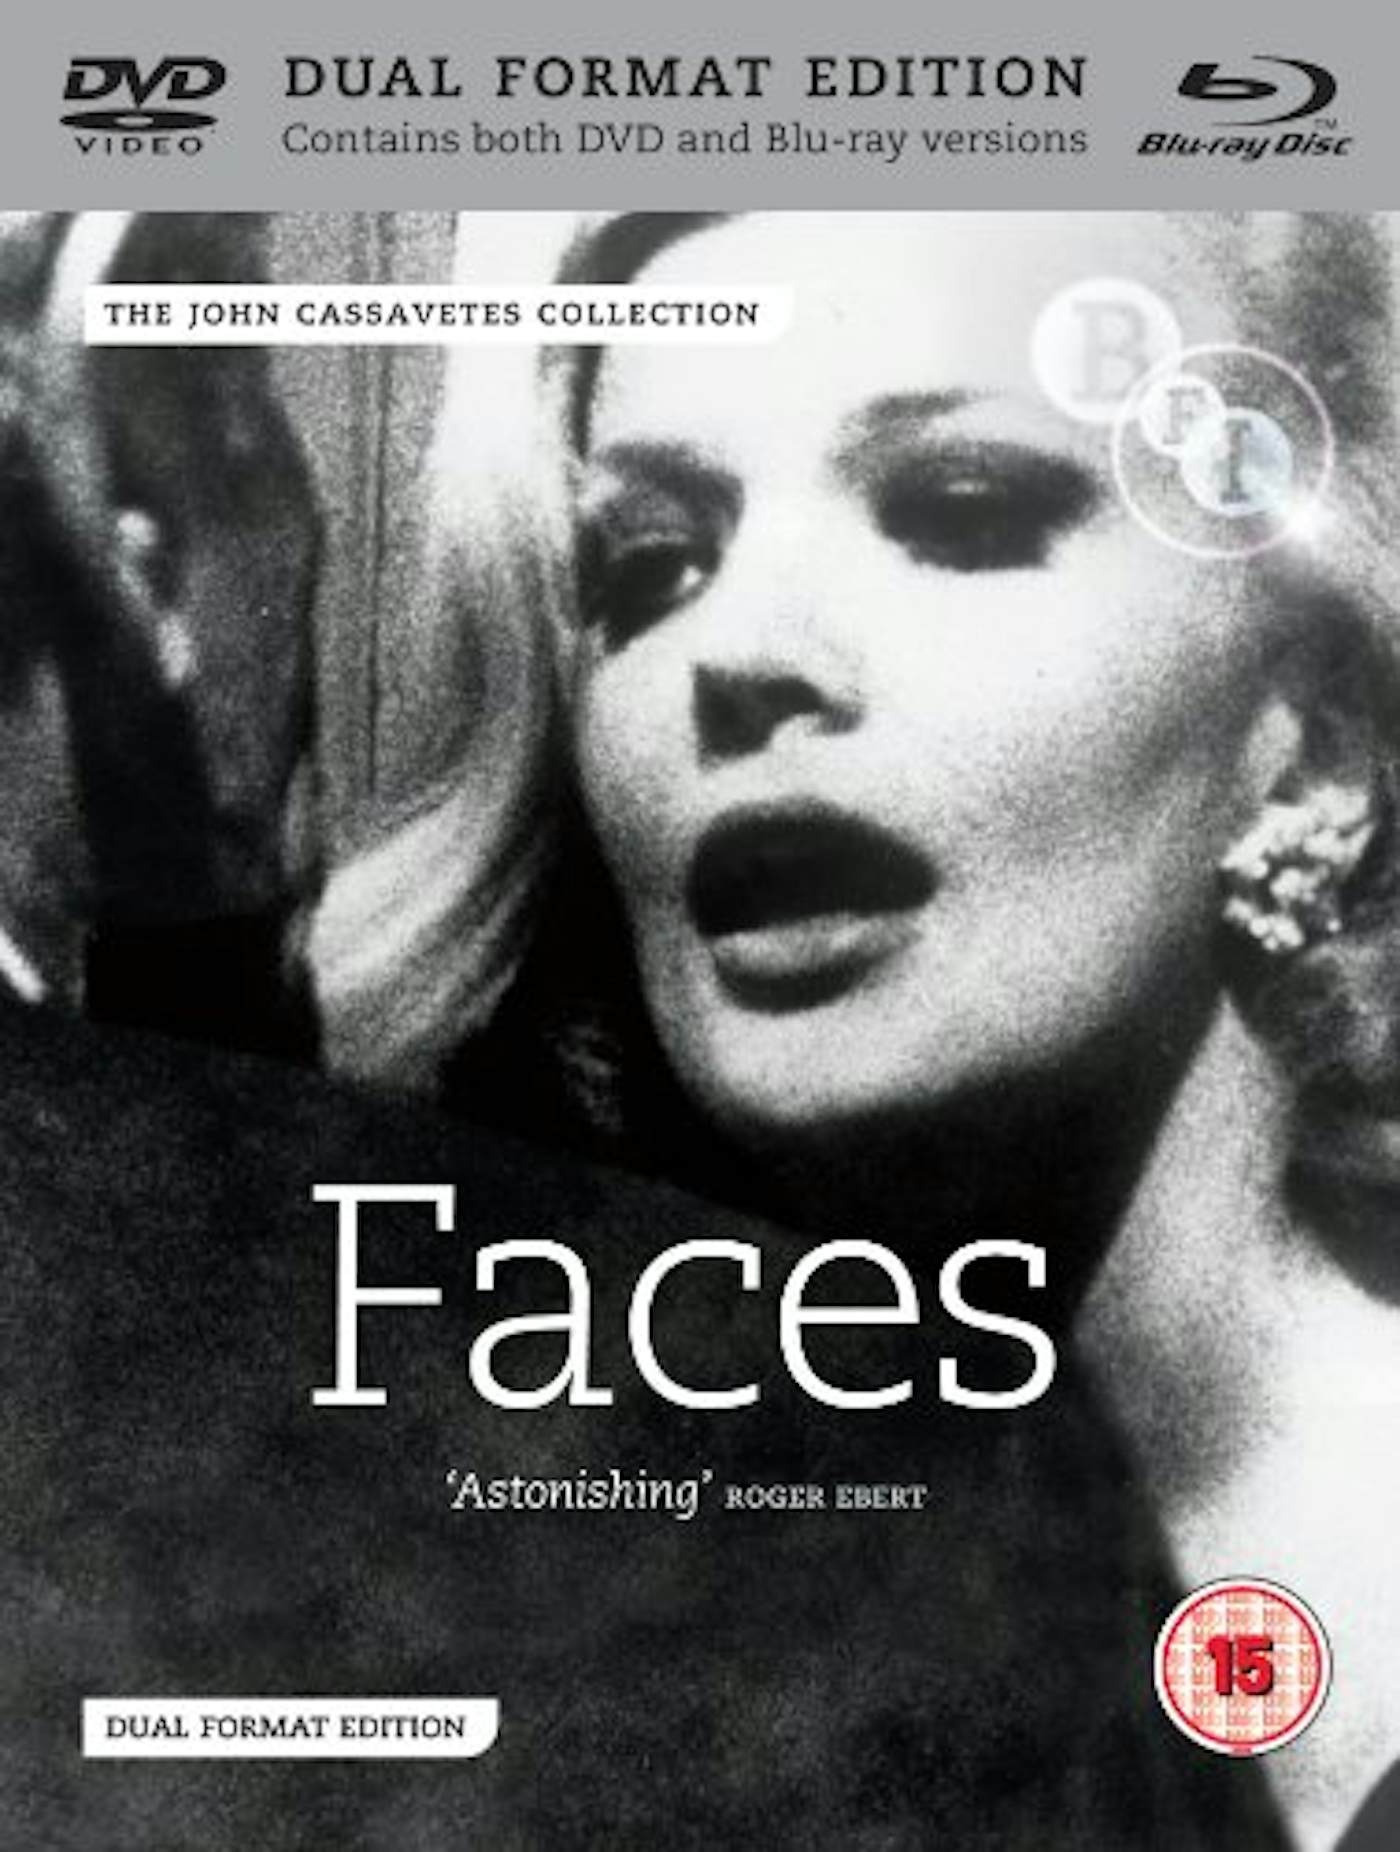 Faces (CASSAVETES COLLECTION) Blu-ray